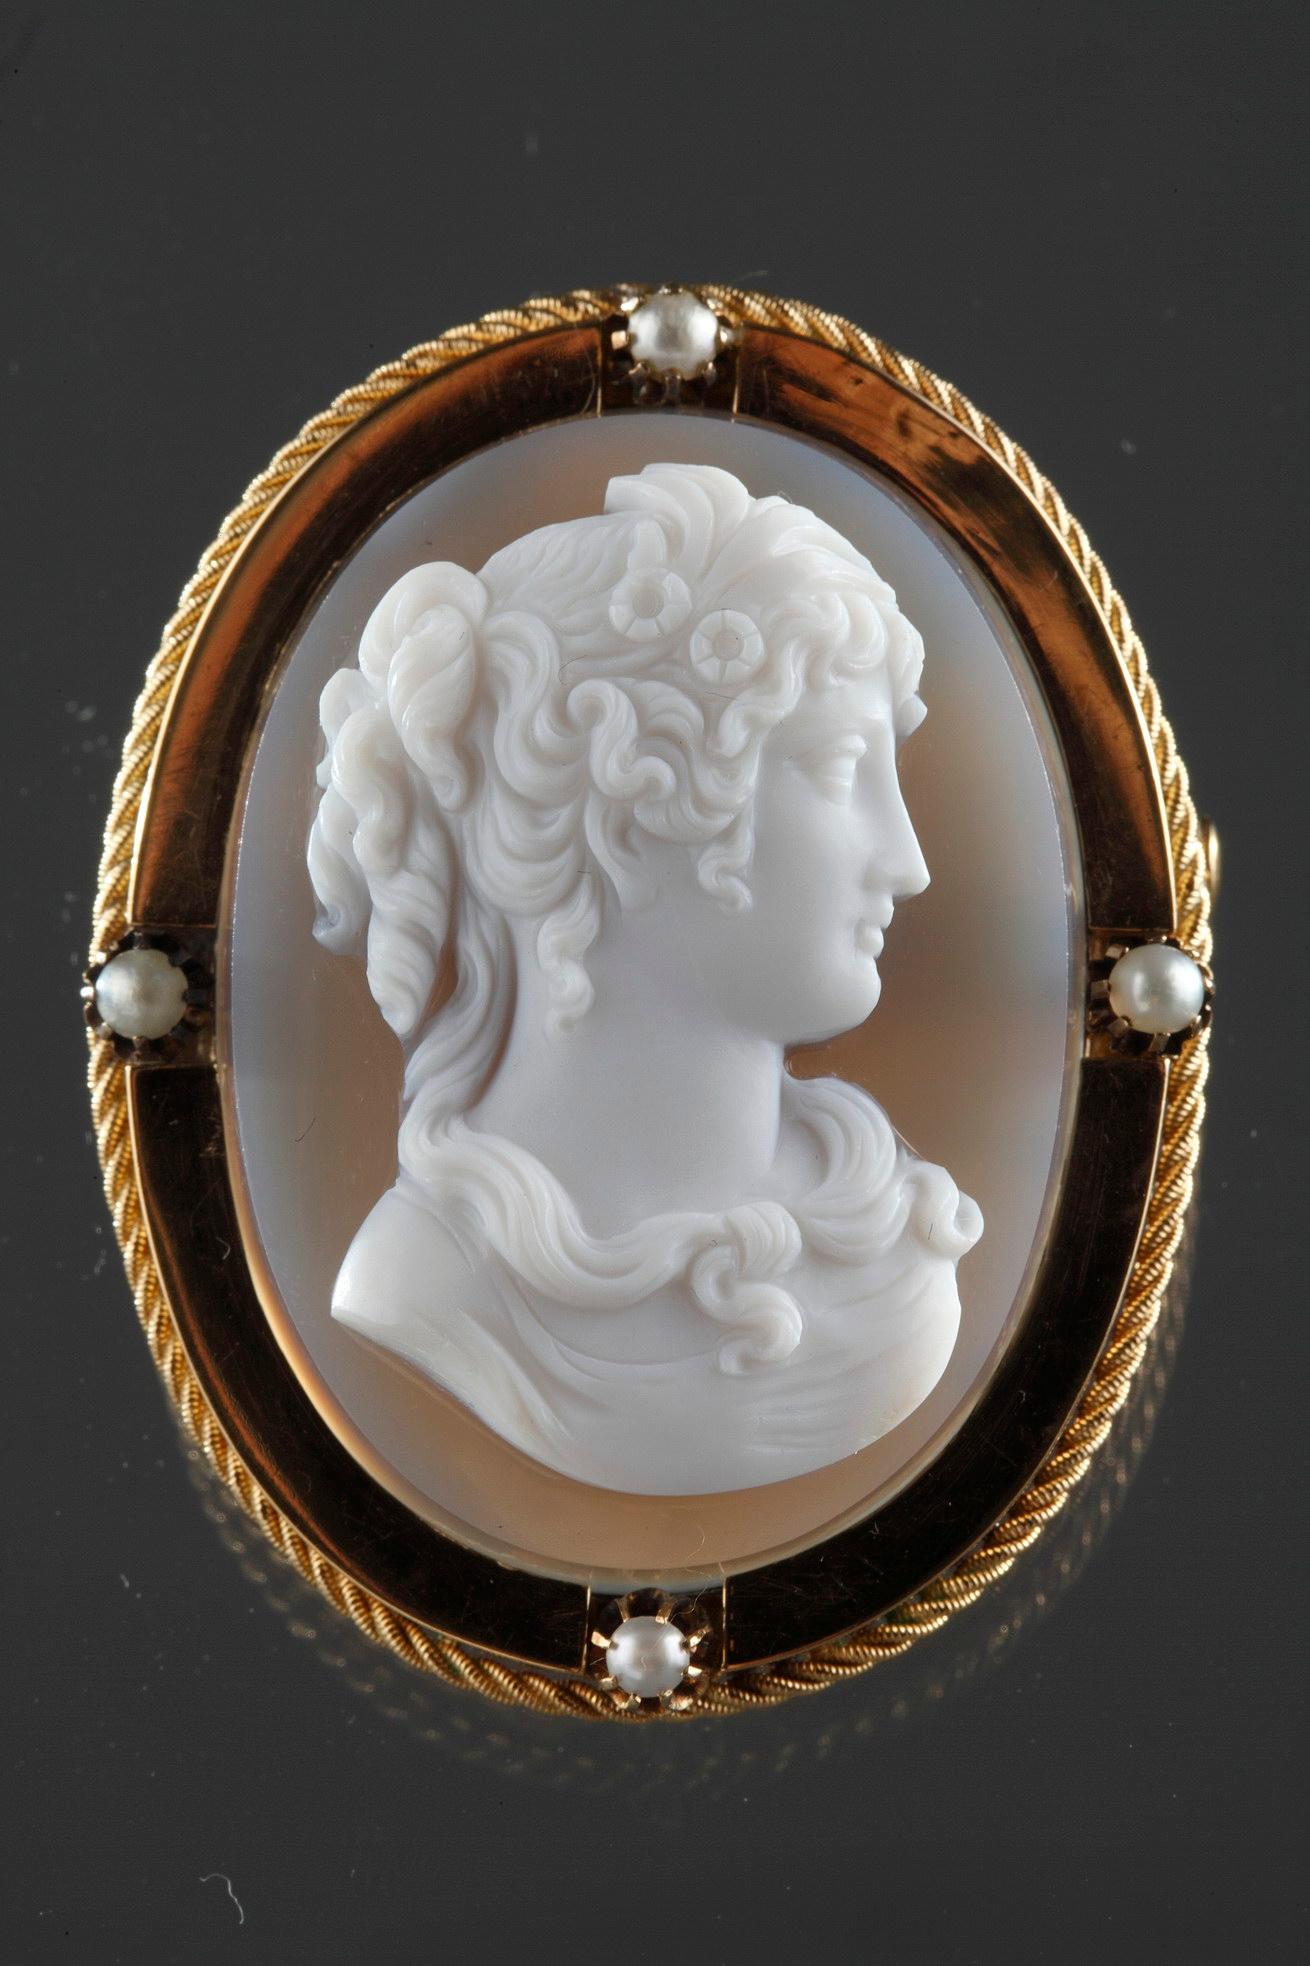 Cameo on blue-gray agate featuring a young woman looking toward the right. The artist intricately sculpted the white vein of the agate to bring the delicate profile to life. The young woman represented in bust has hair up. Strands of her hair fall